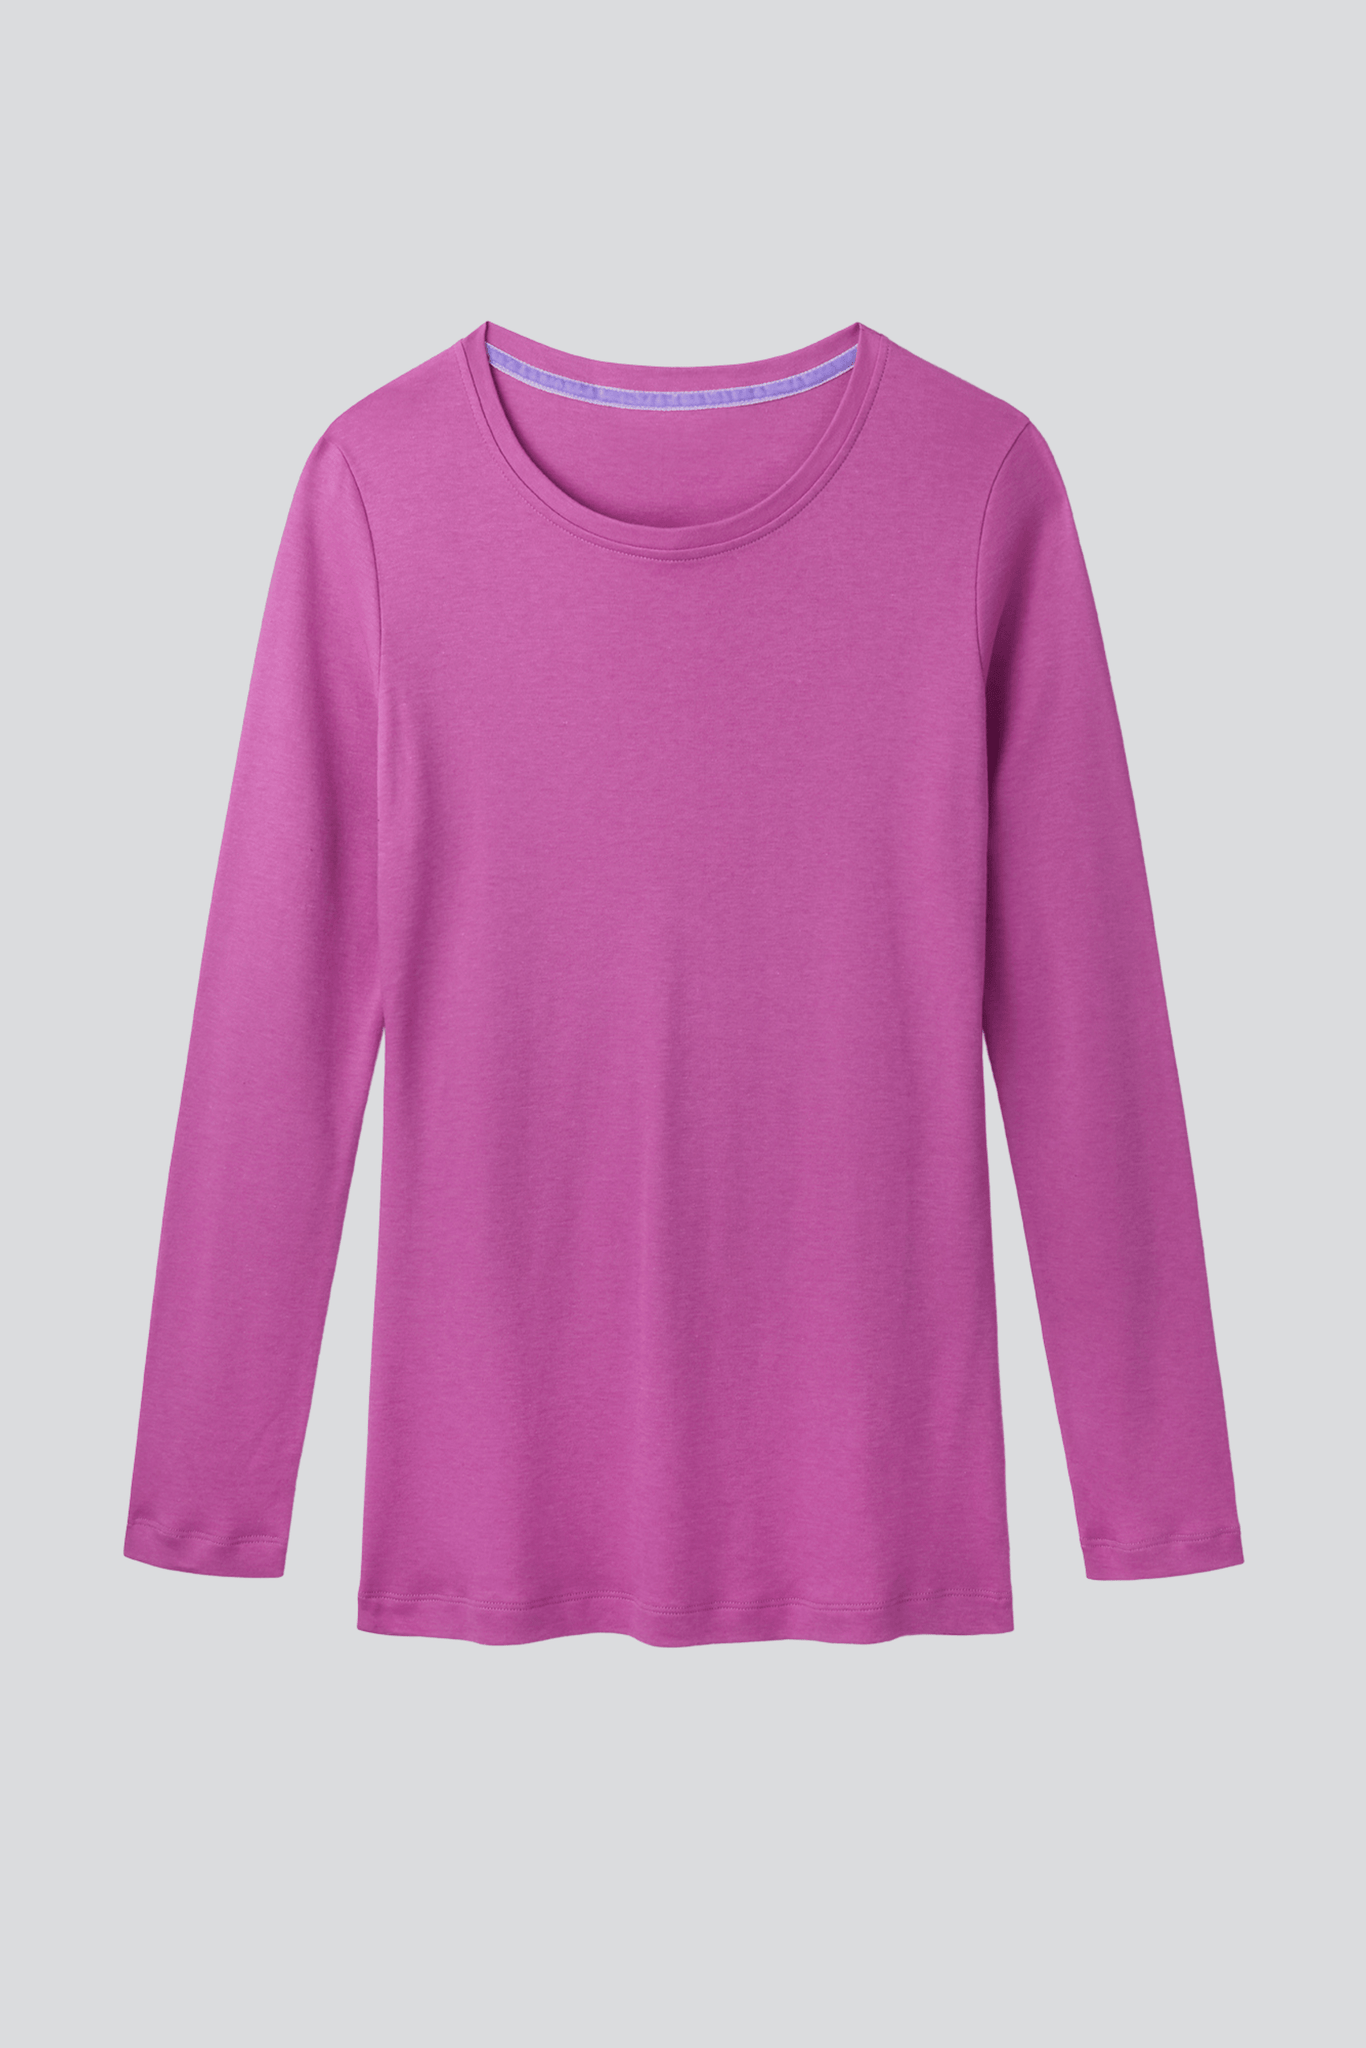 Pink Long Sleeve Crew Neck Cotton Modal Blend T-shirt by Lavender Hill